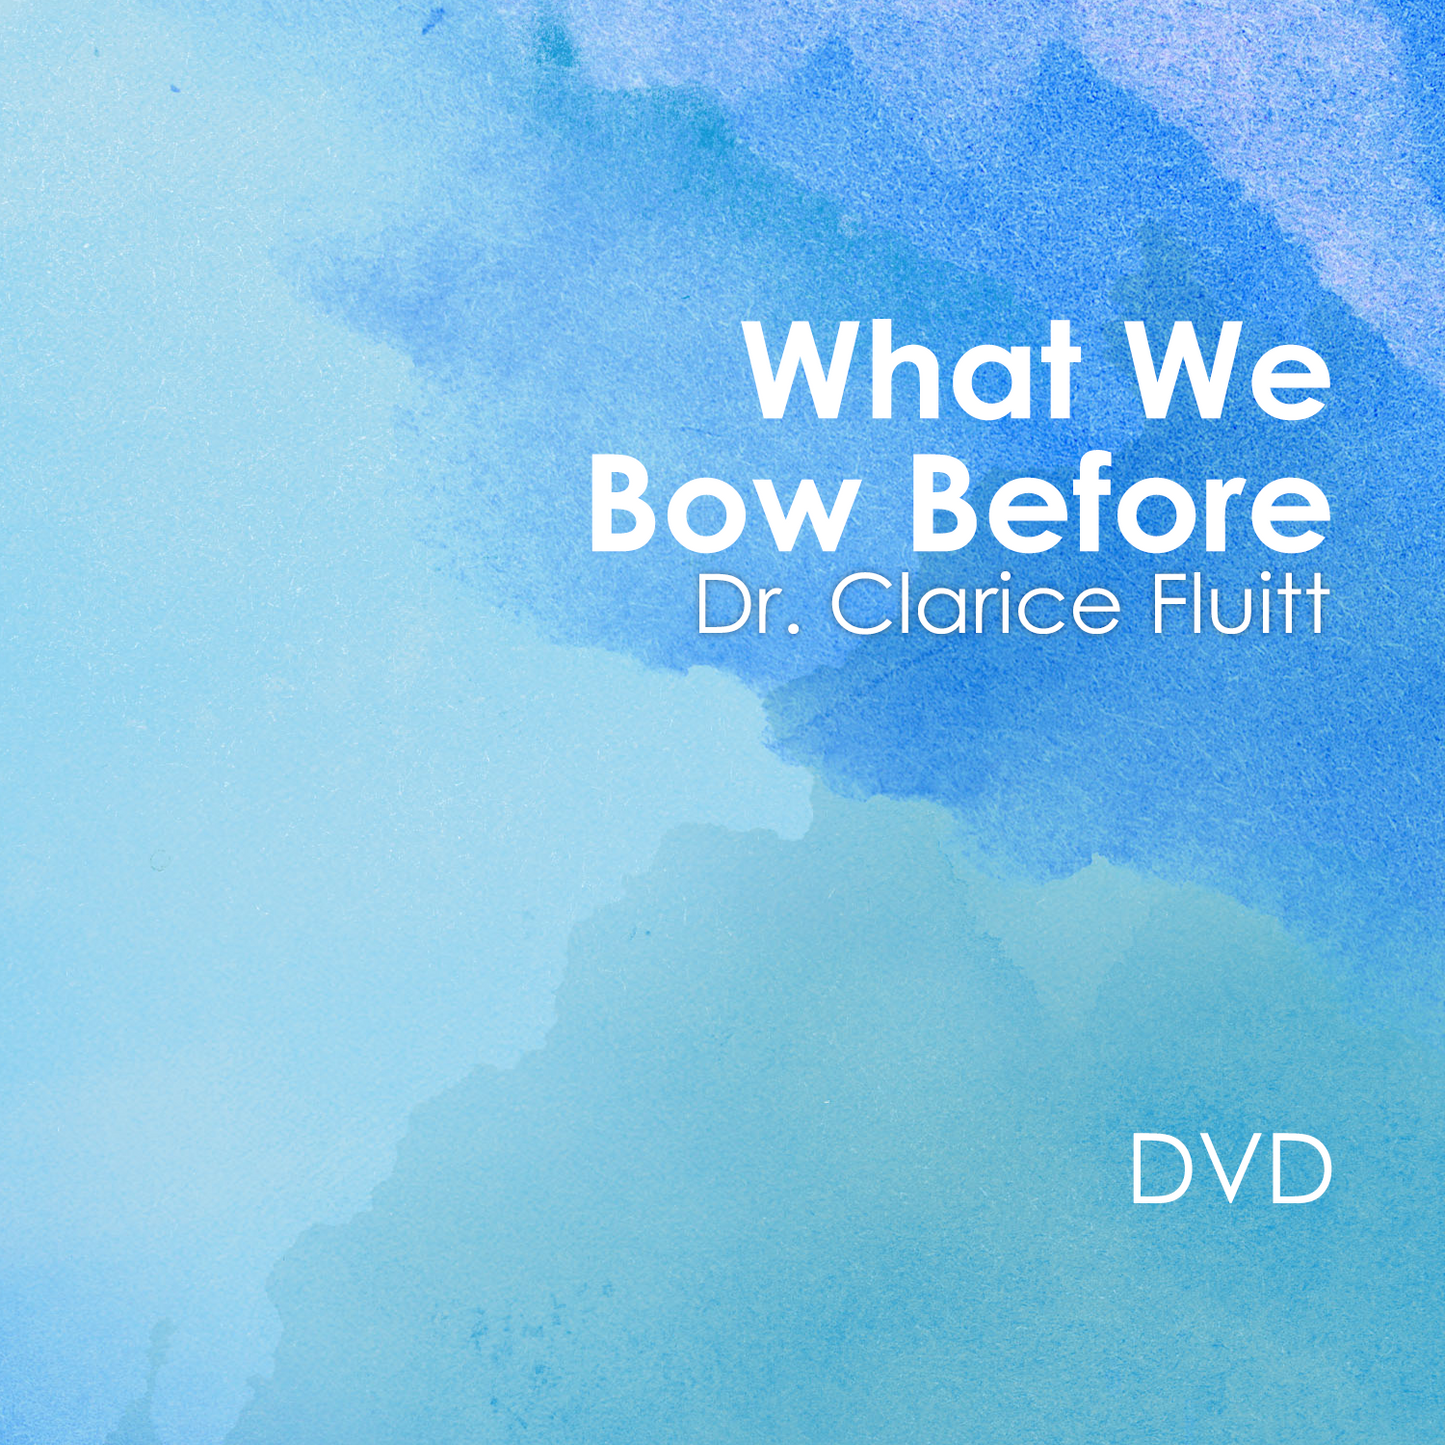 What You Bow Before DVD